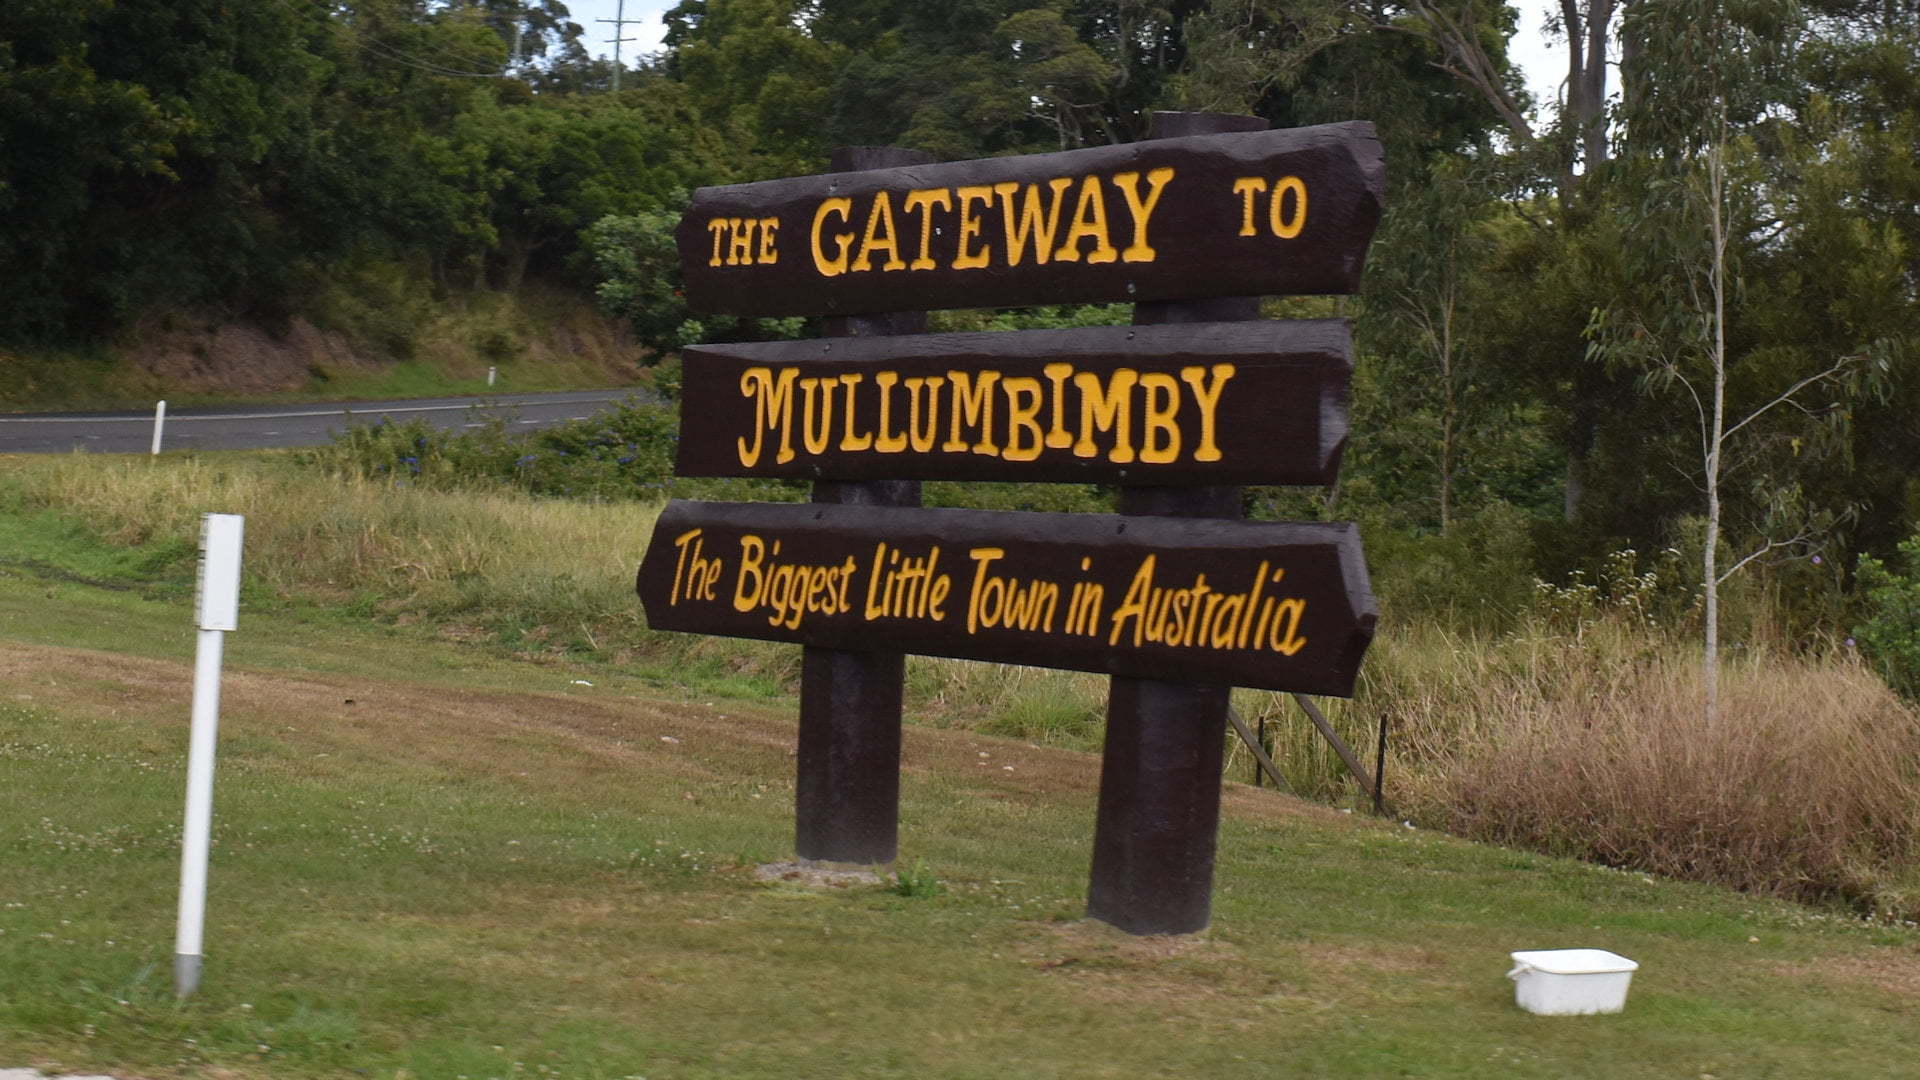 The Gateway to Mullumbimby - The Biggest Little Town in Australia